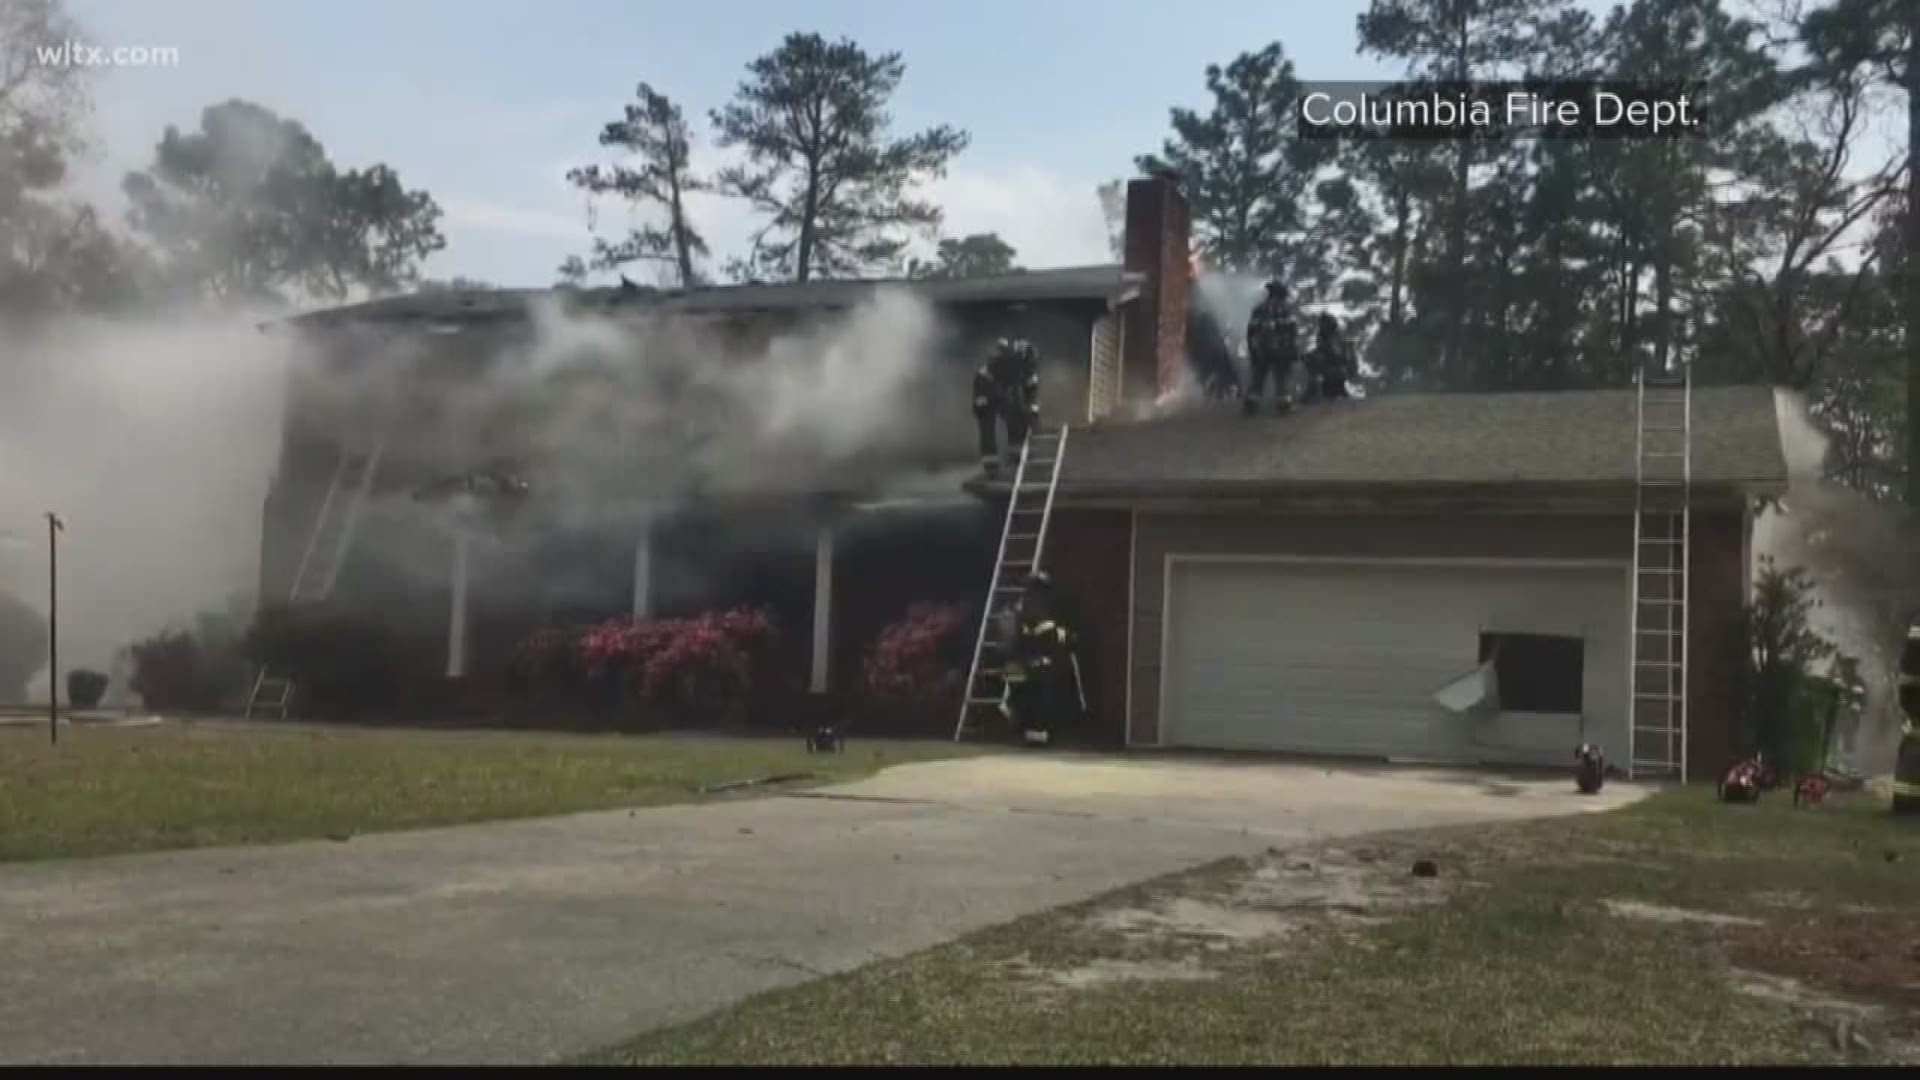 The fire was at a home on Crabtree road, the firefighters injuries are non-life threatening